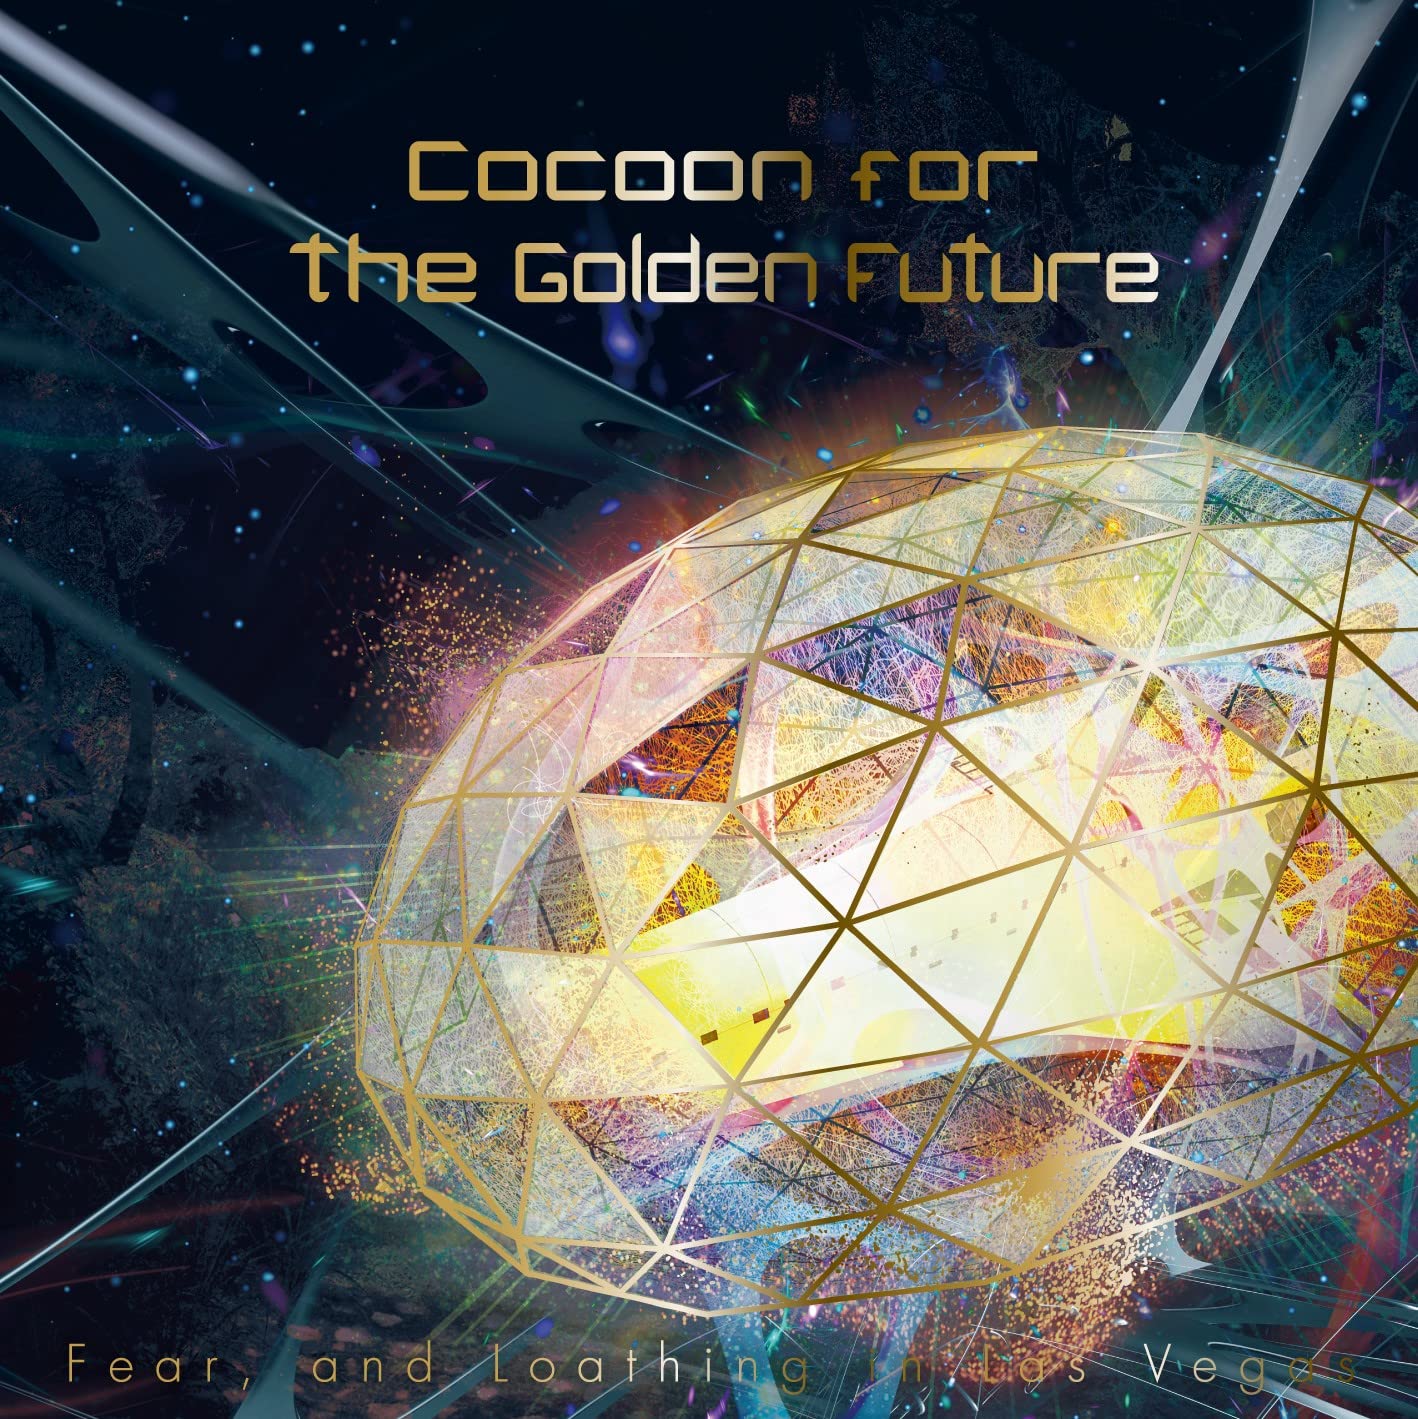 Fear, and Loathing in Las Vegas – Cocoon for the Golden Future (2022) [MP3 320kbps]